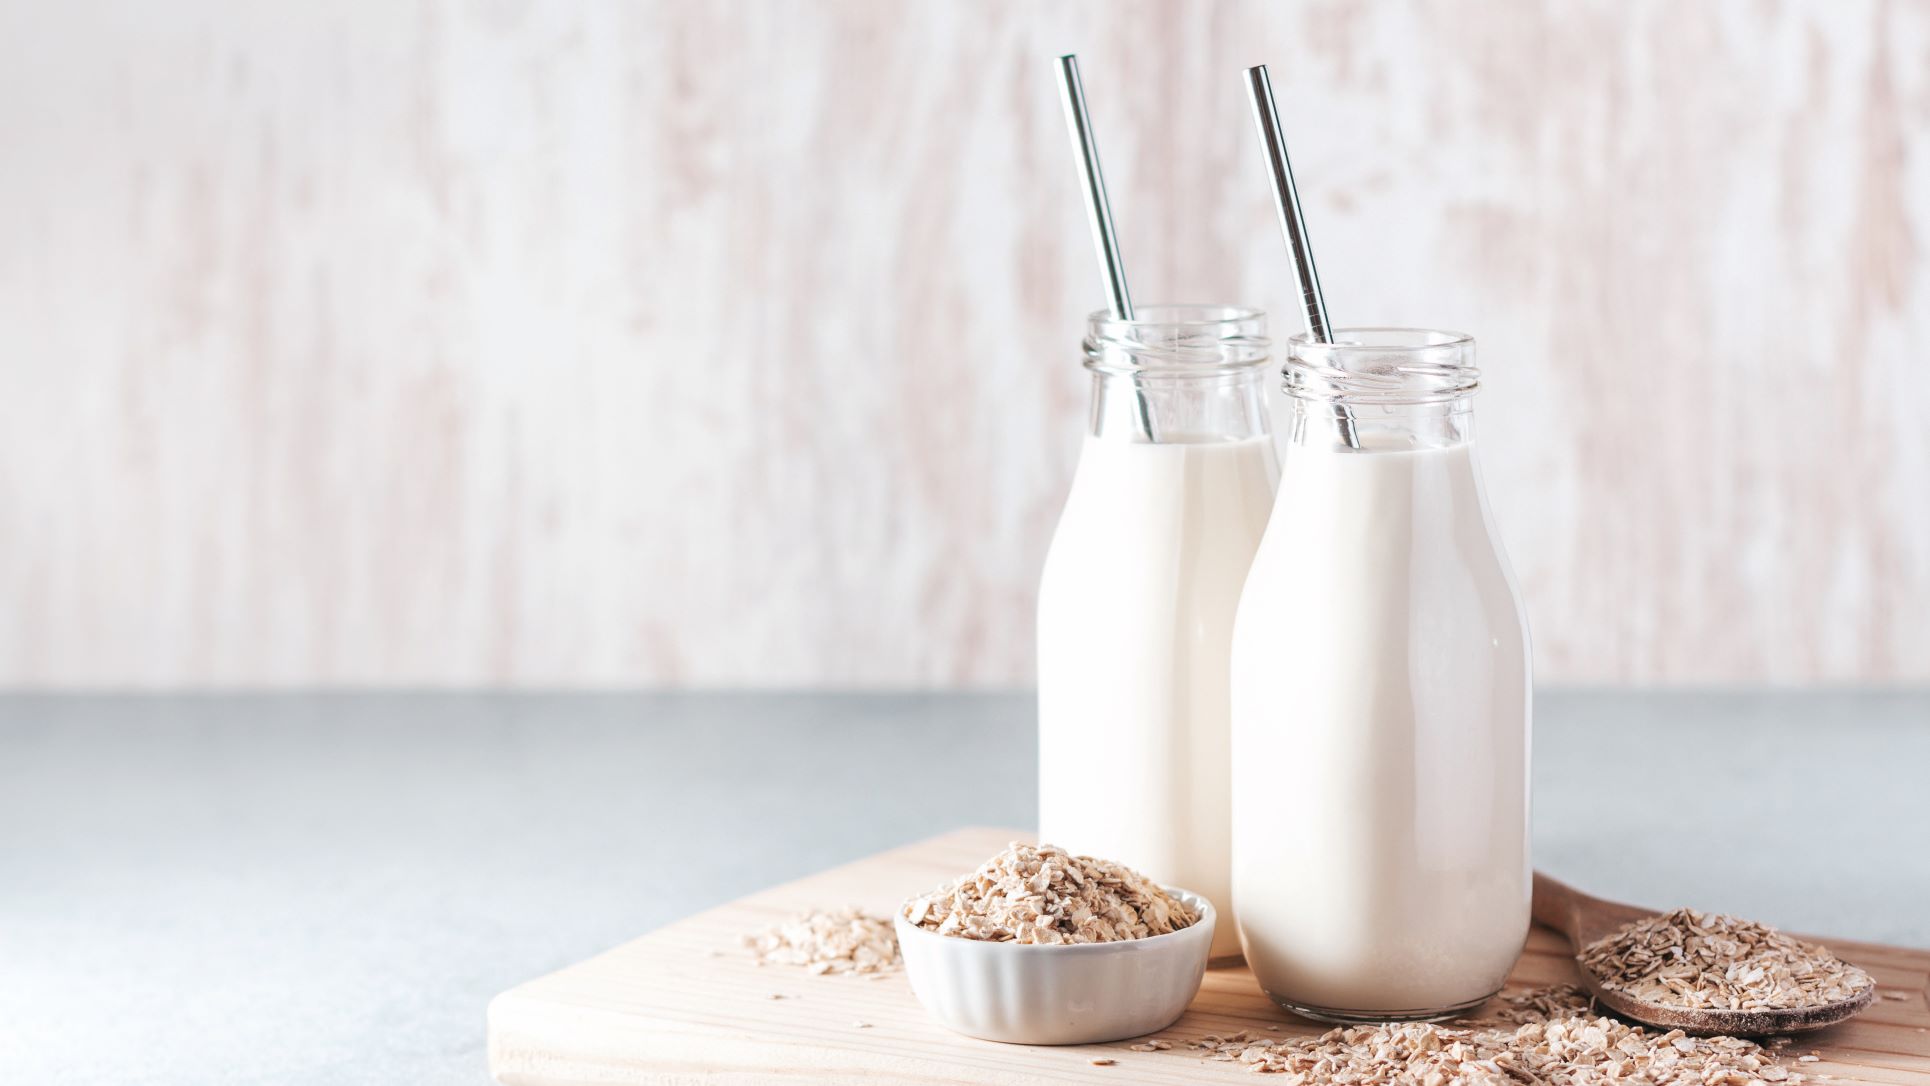 glass jars of milk or yoghurt next to whole oats on white background, showing how to avoid ultra processed foods upfs